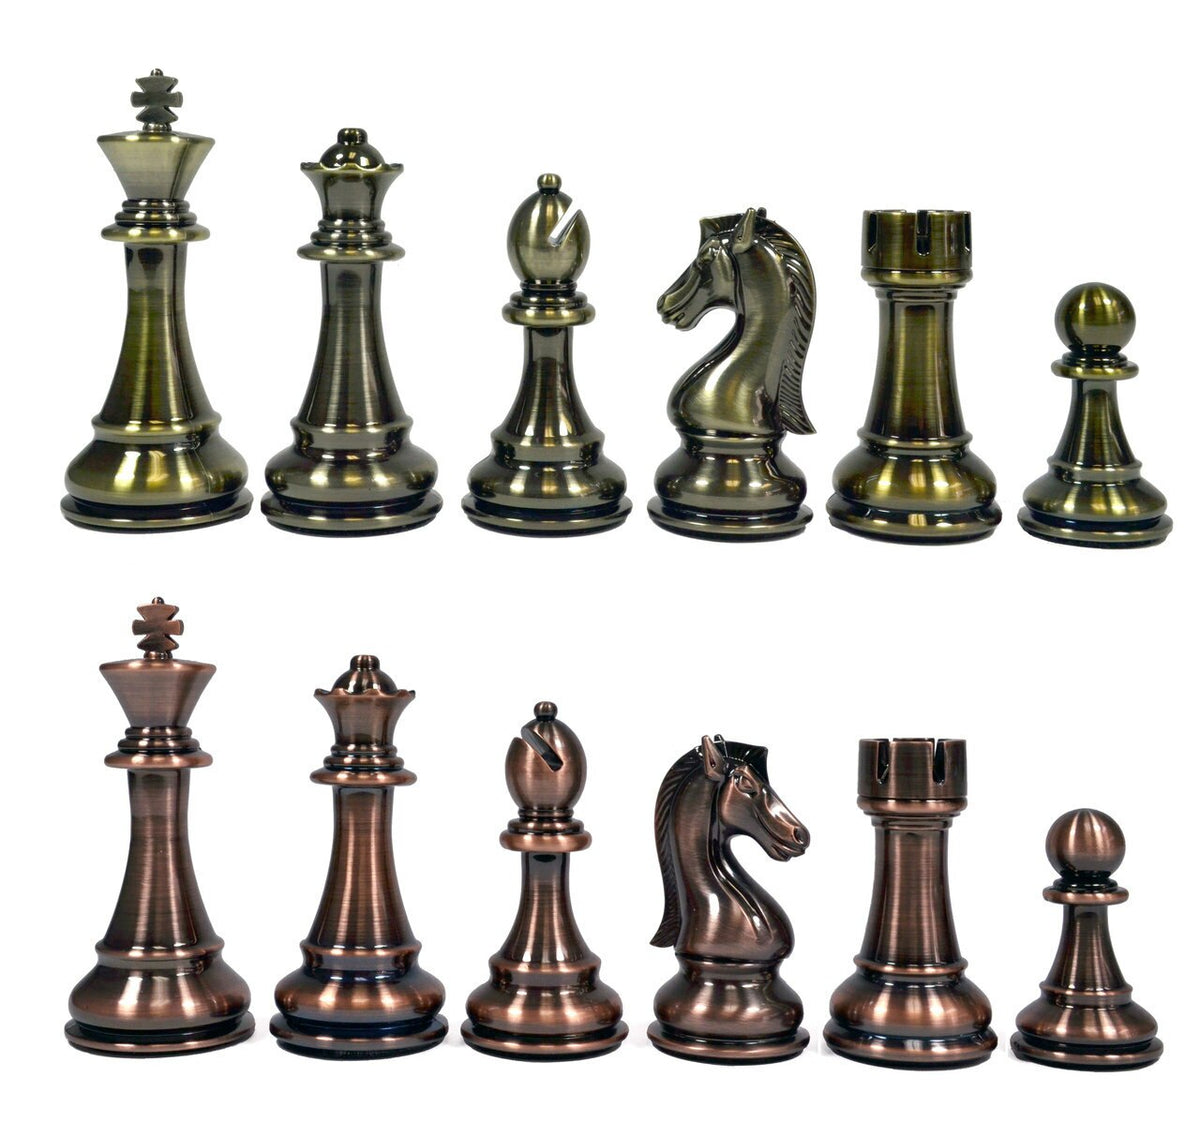 Metallic Candidate Chess Pieces with 4-1/4" King